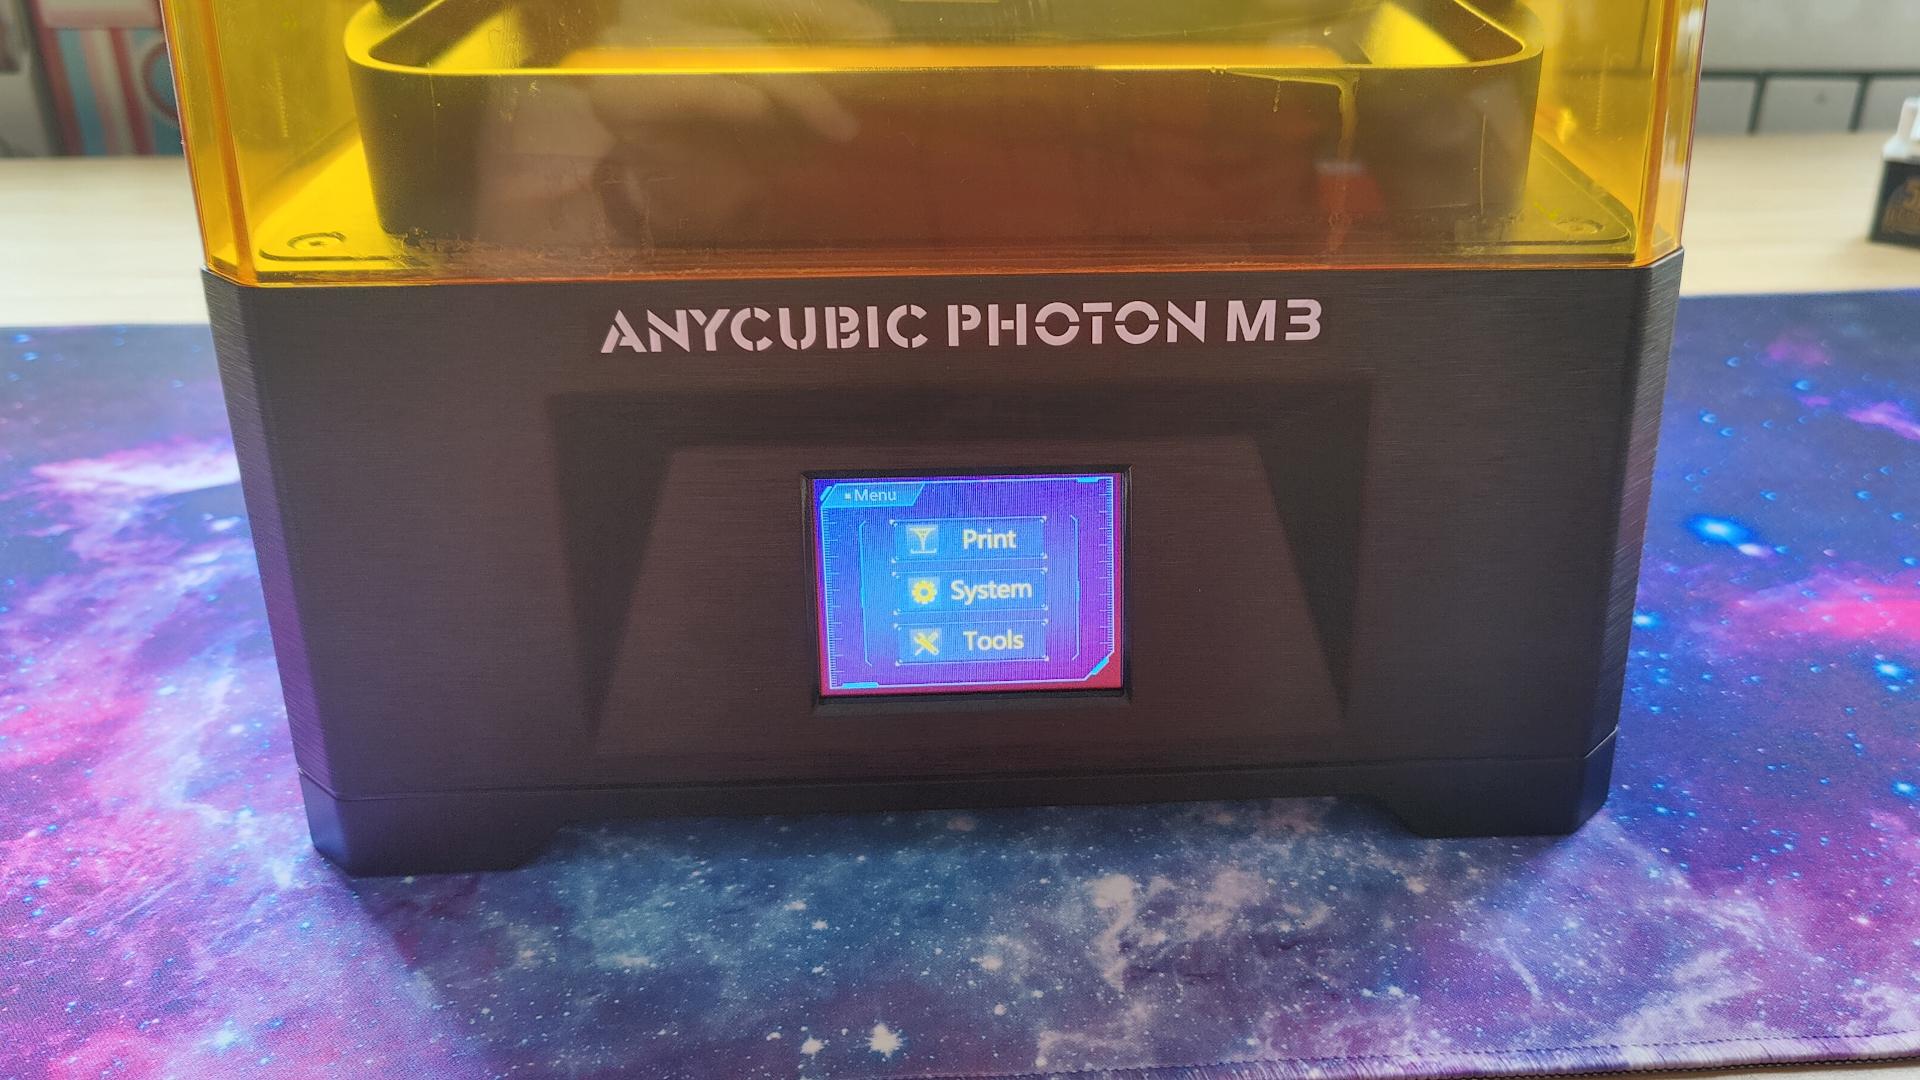 Anycubic Photon M3 touch screen